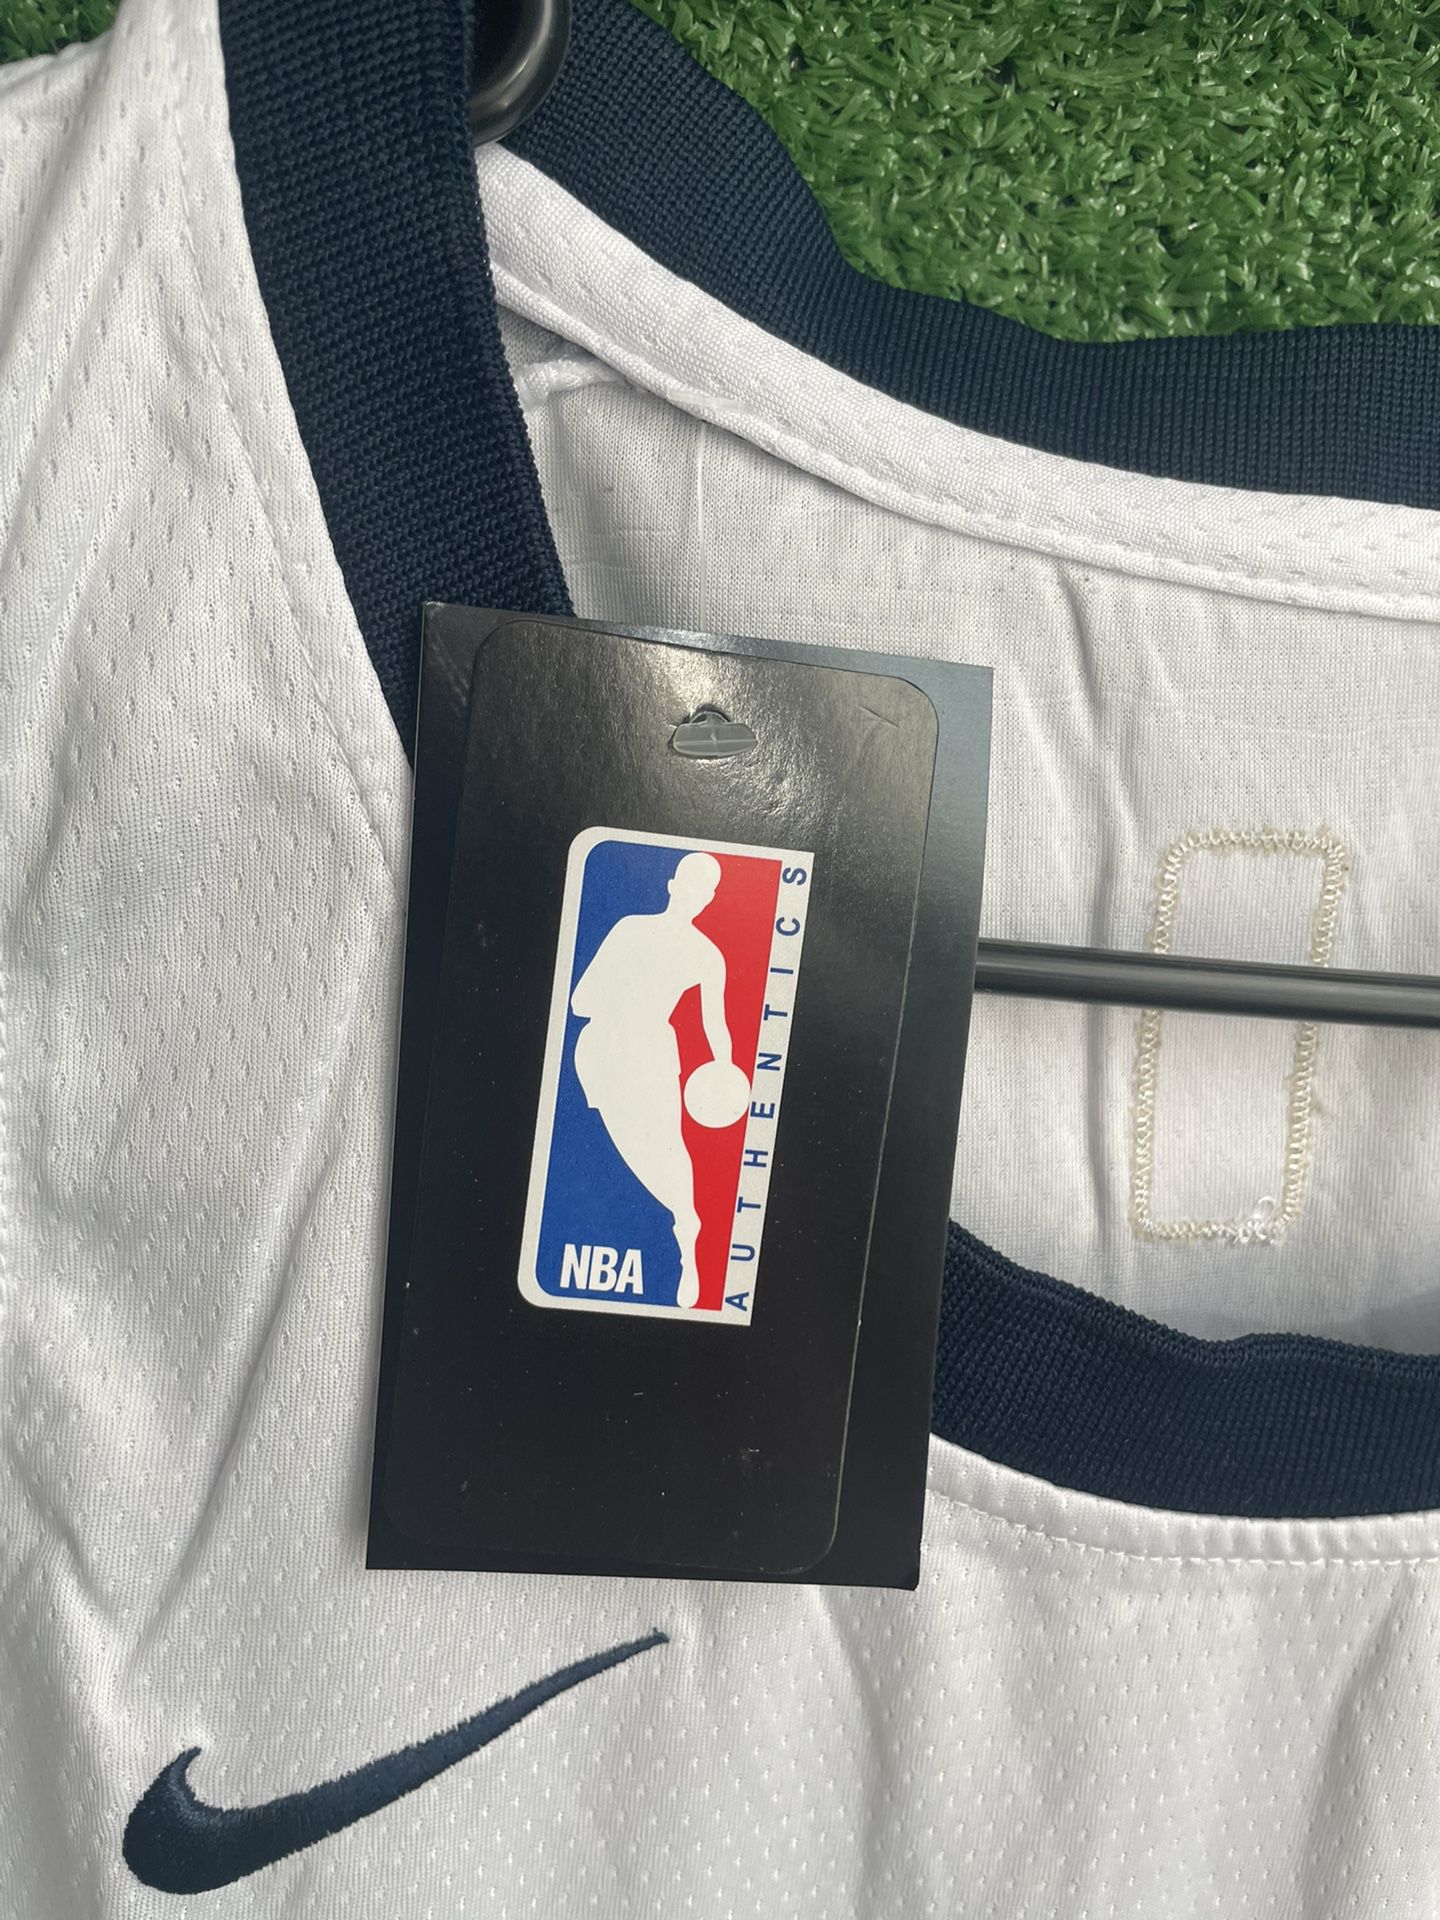 Jokic Black Jersey Med. New With Tags Stitched for Sale in Thornton, CO -  OfferUp